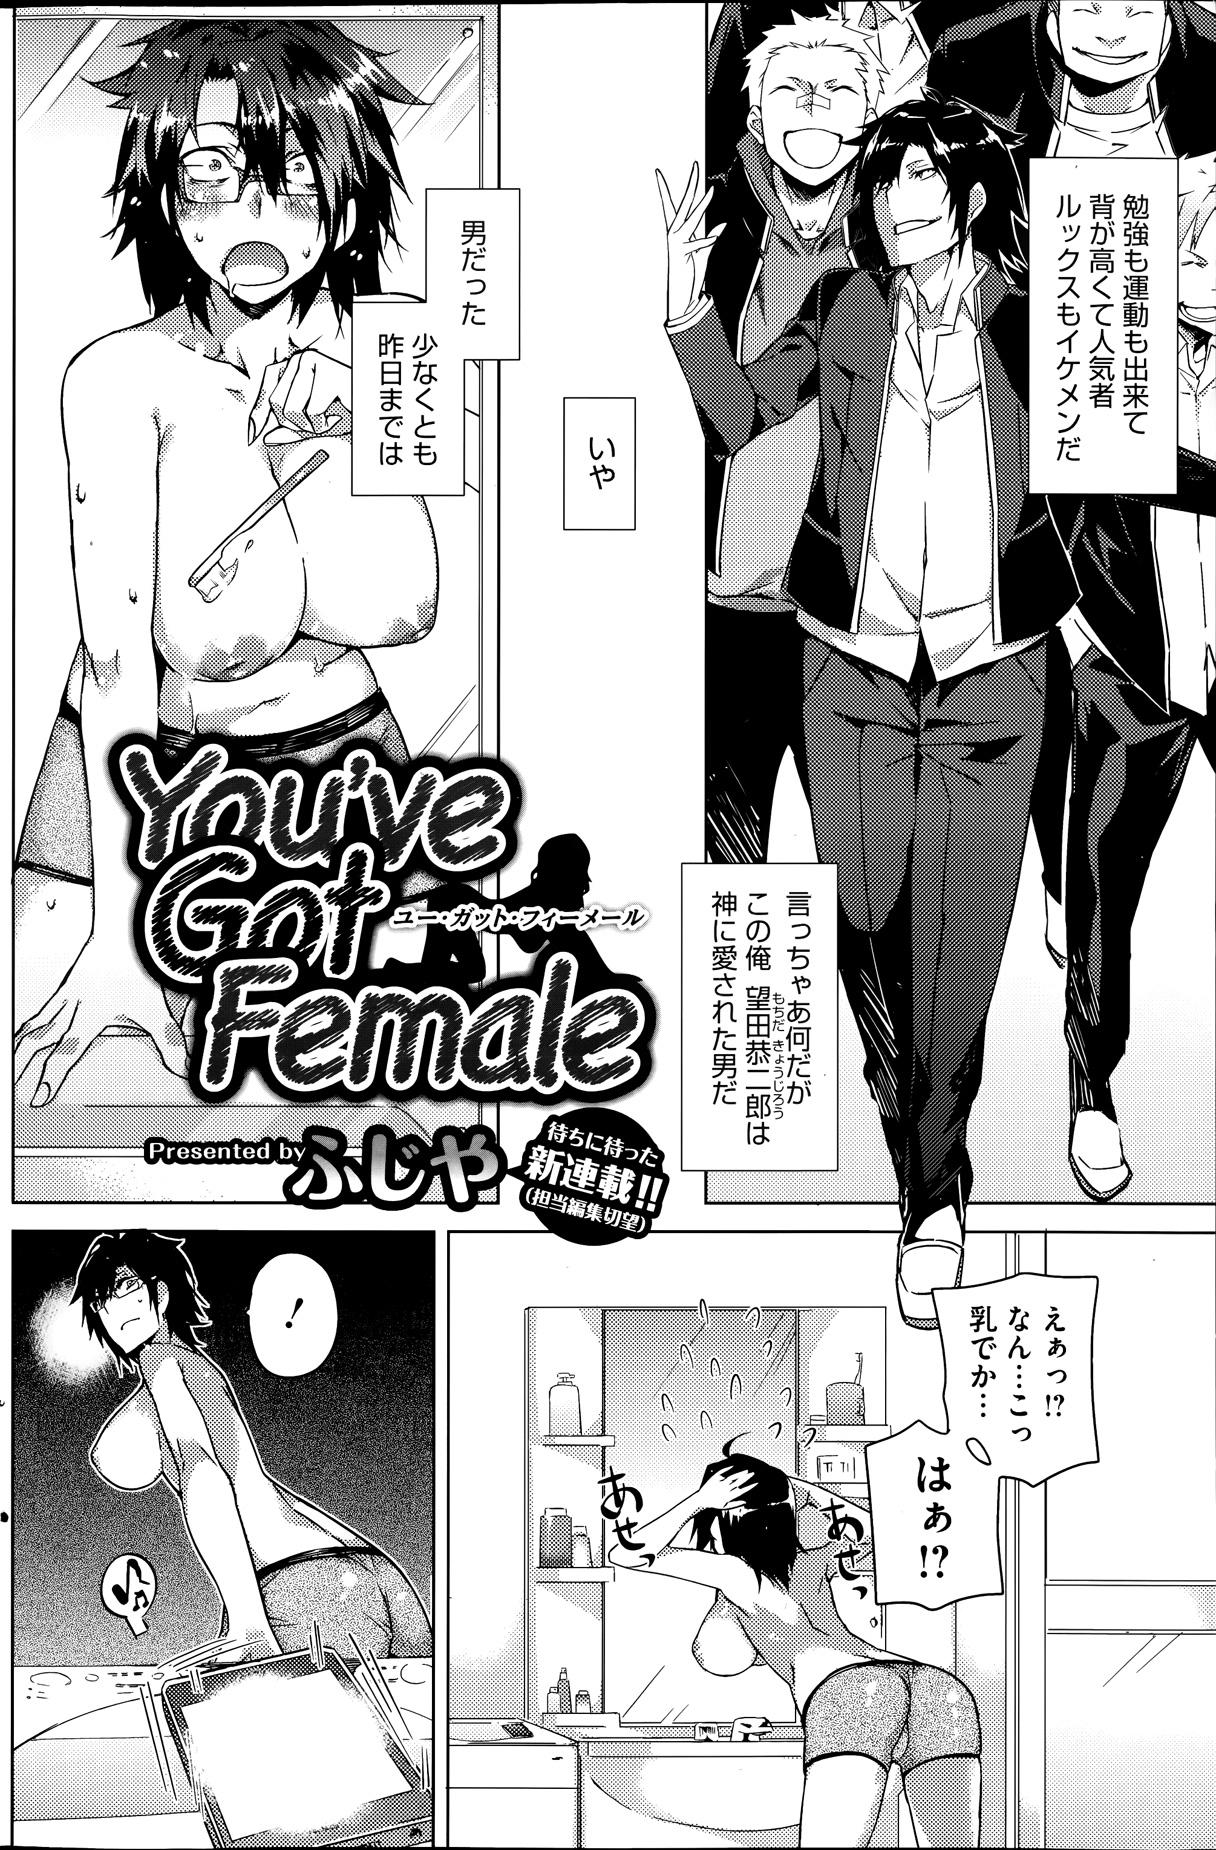 Gay Sex You've Got Female Ch. 01-02 Stunning - Page 2